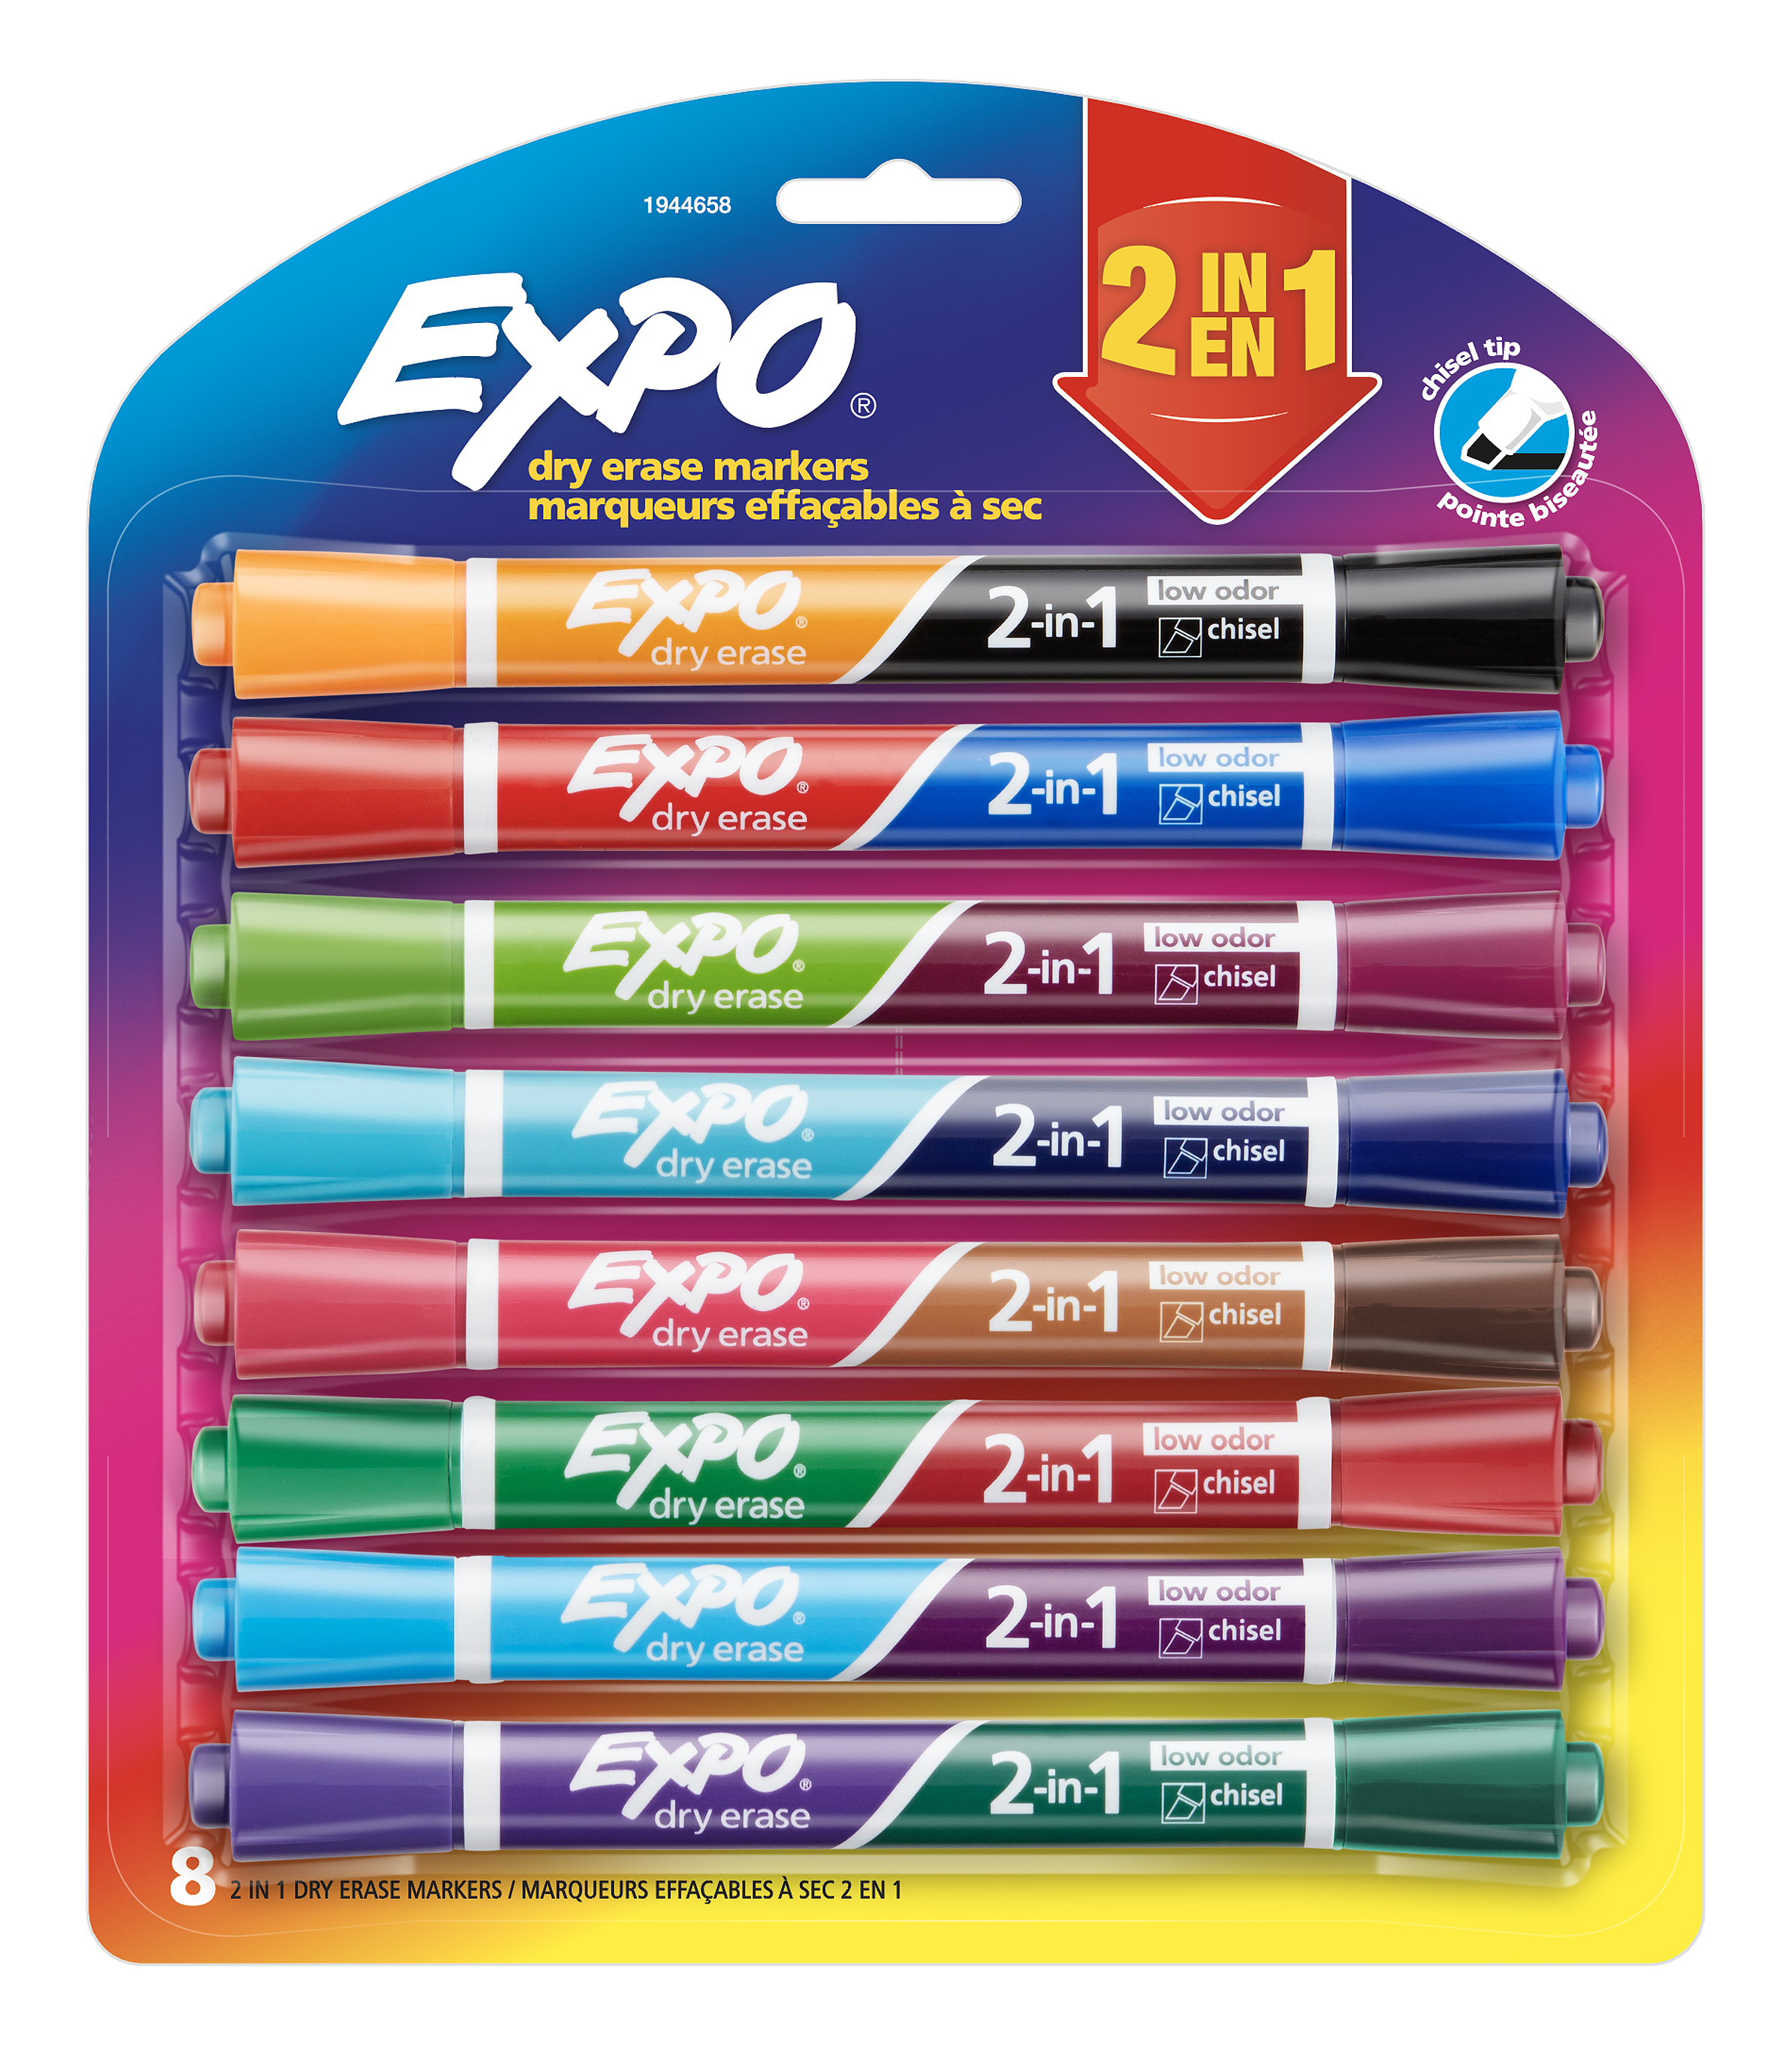 EXPO 2-in-1 Dry Erase Markers, Chisel Tip | Expo